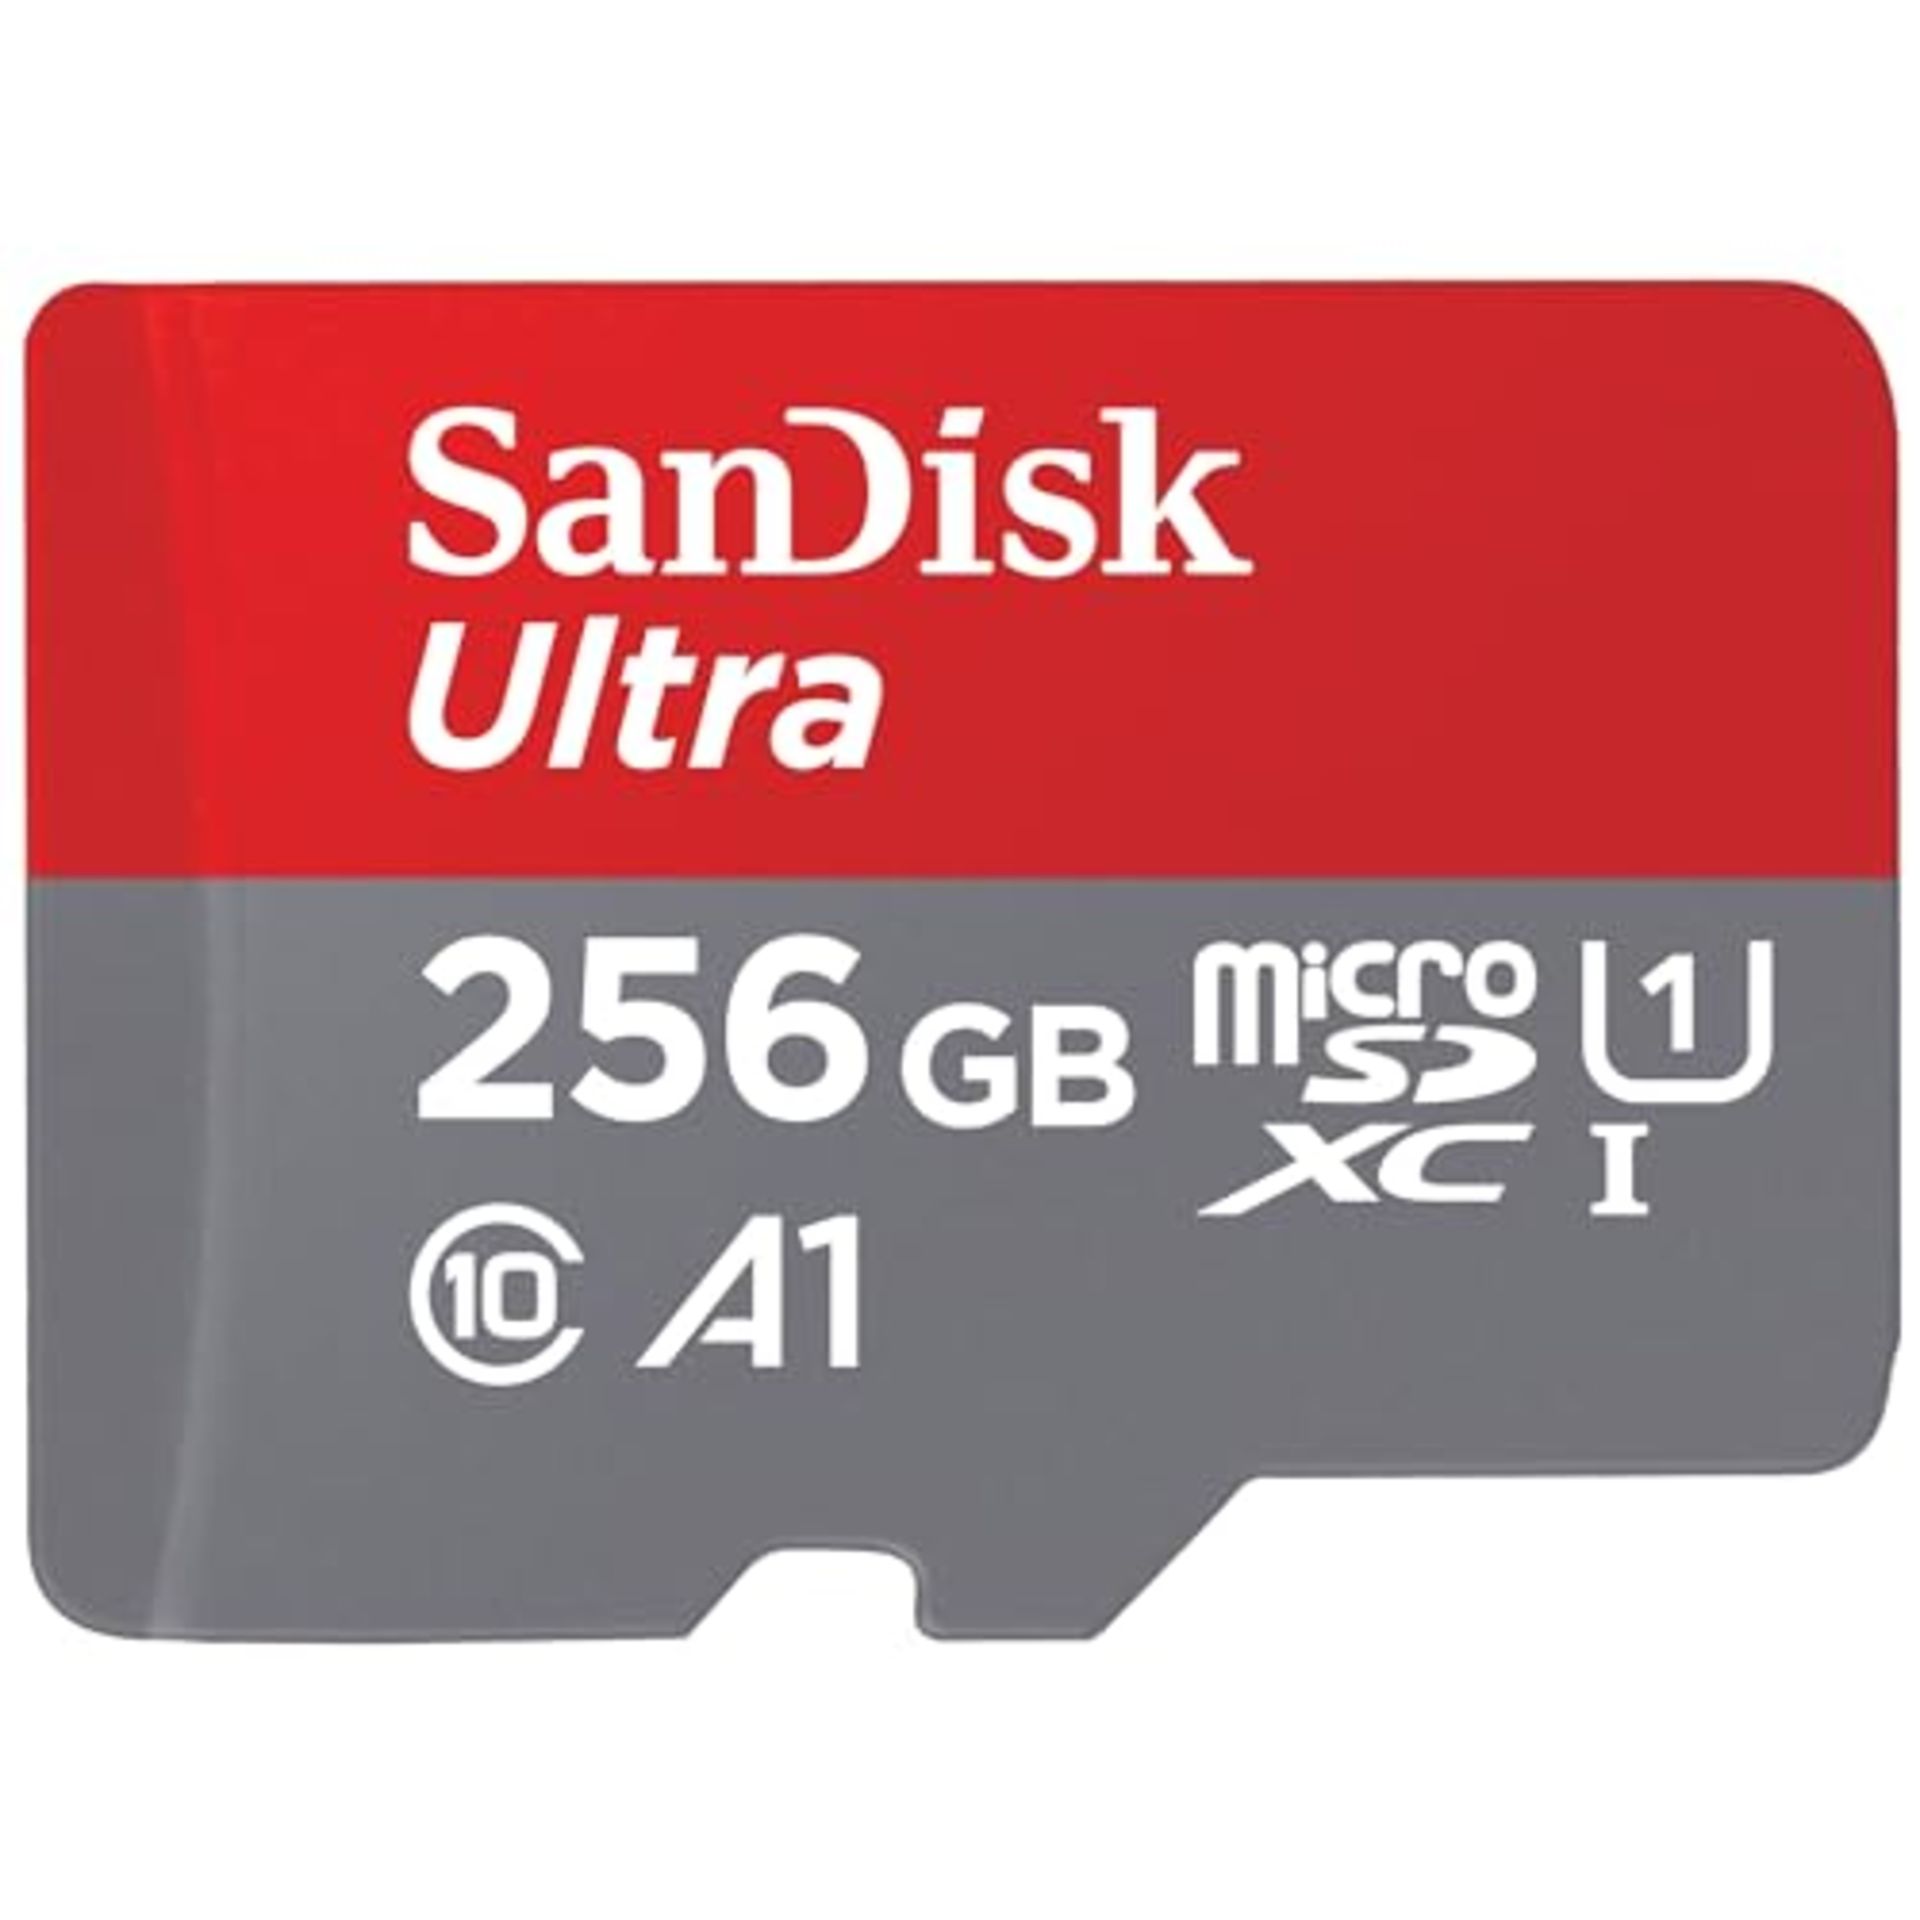 SanDisk Ultra Android microSDXC UHS-I Memory Card 256GB + Adapter (For Smartphones and